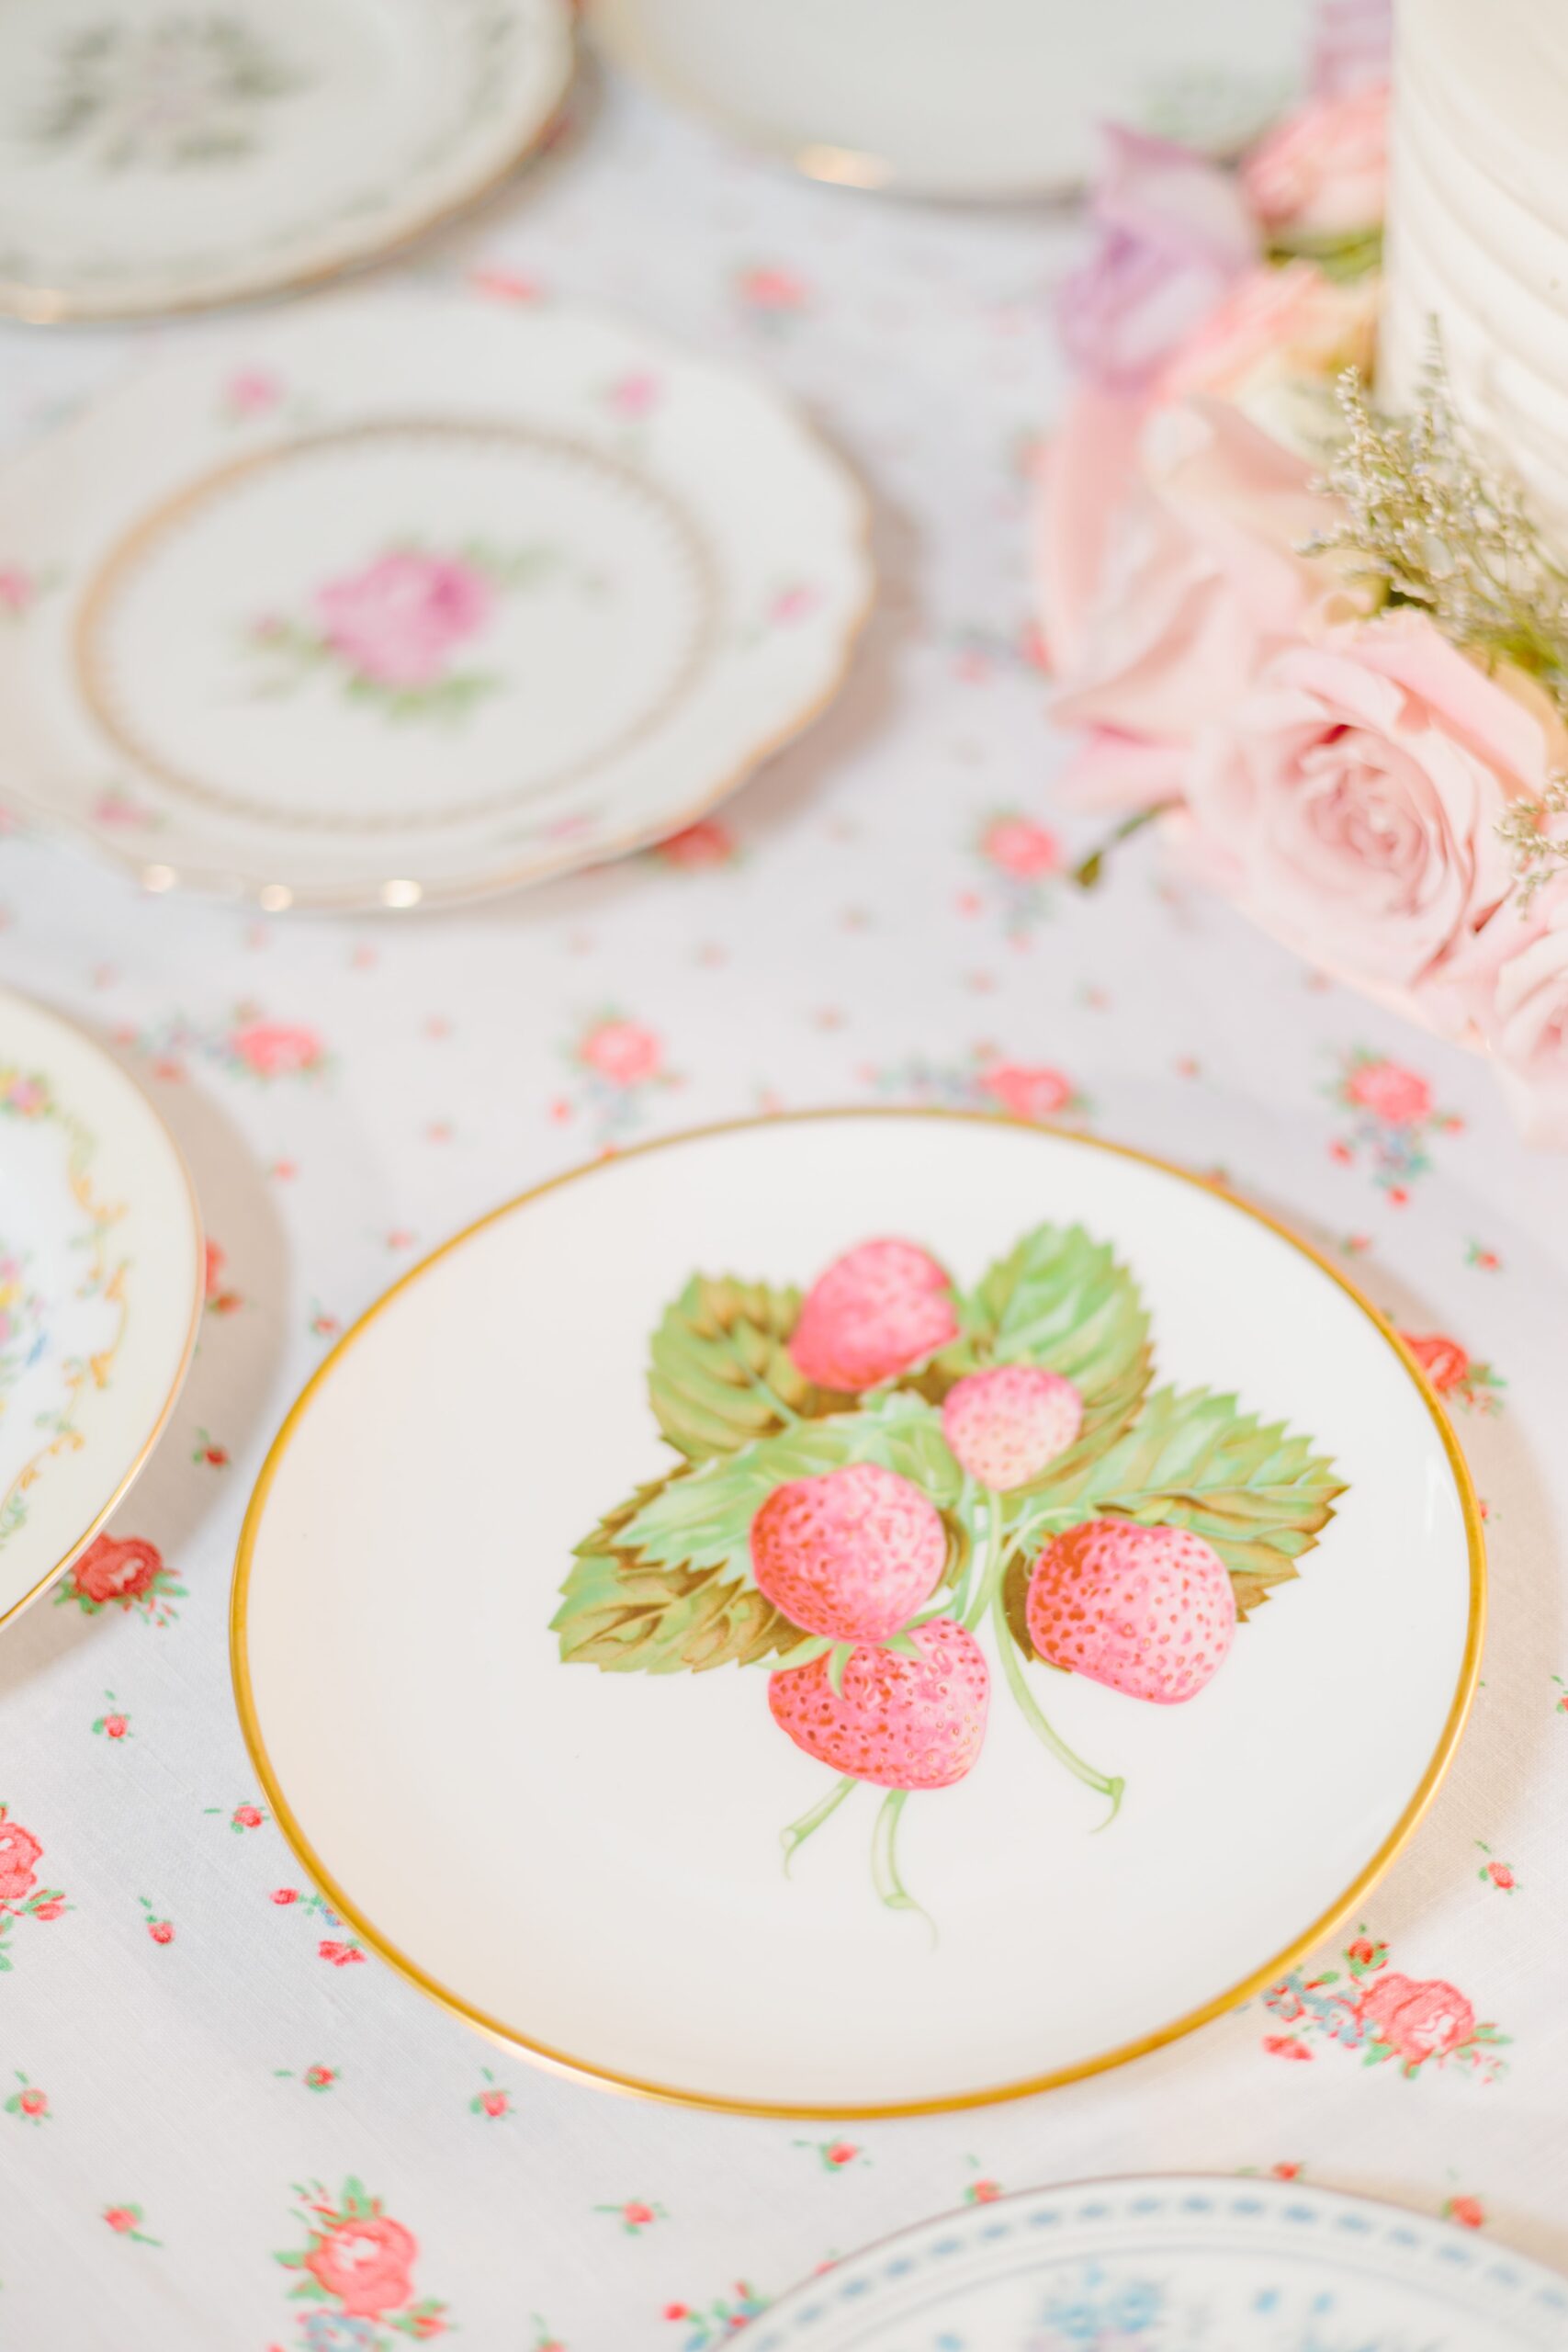 A Greensboro wedding with vintage china plates for guests. This plate has strawberries drawn on it with a gold rim.